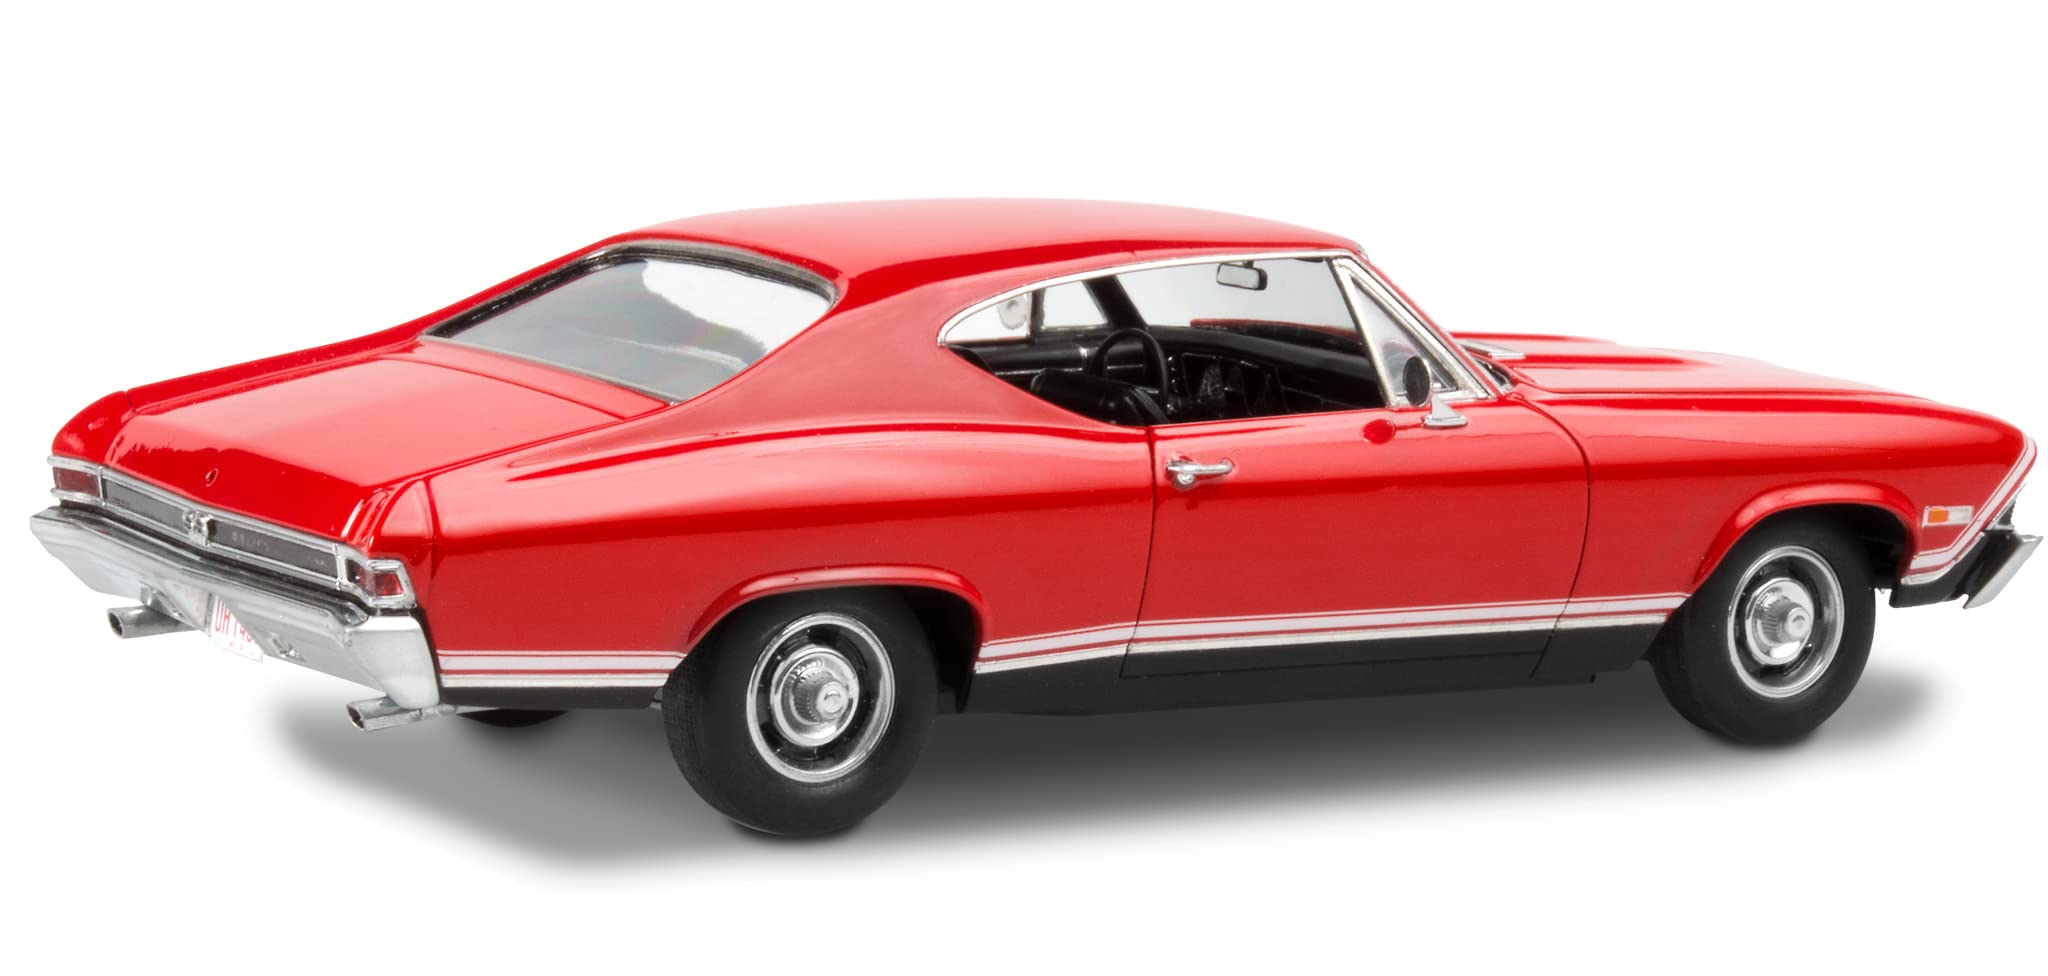 Revell 85-4445 '68 Chevy Chevelle SS 396 Model Car Kit 1:25 Scale, Skill Level 5 Plastic Model Building Kit, Red, Small, 126-Piece